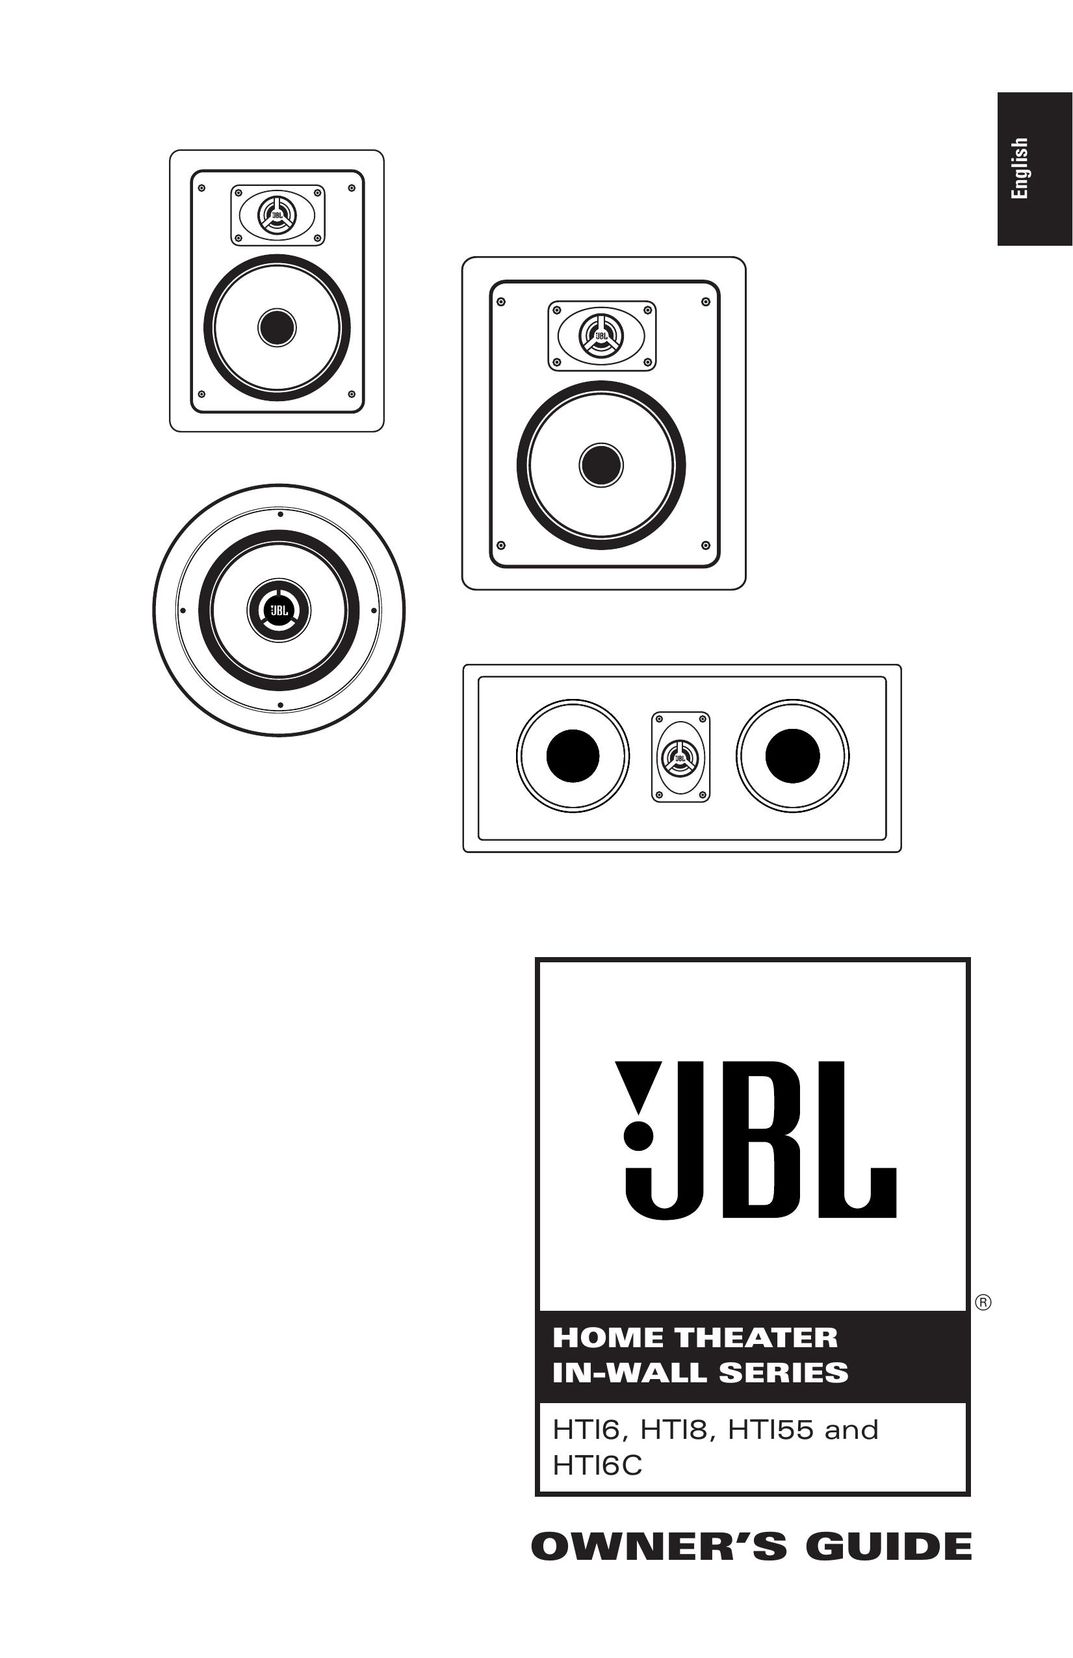 JBL HT16C Home Theater System User Manual